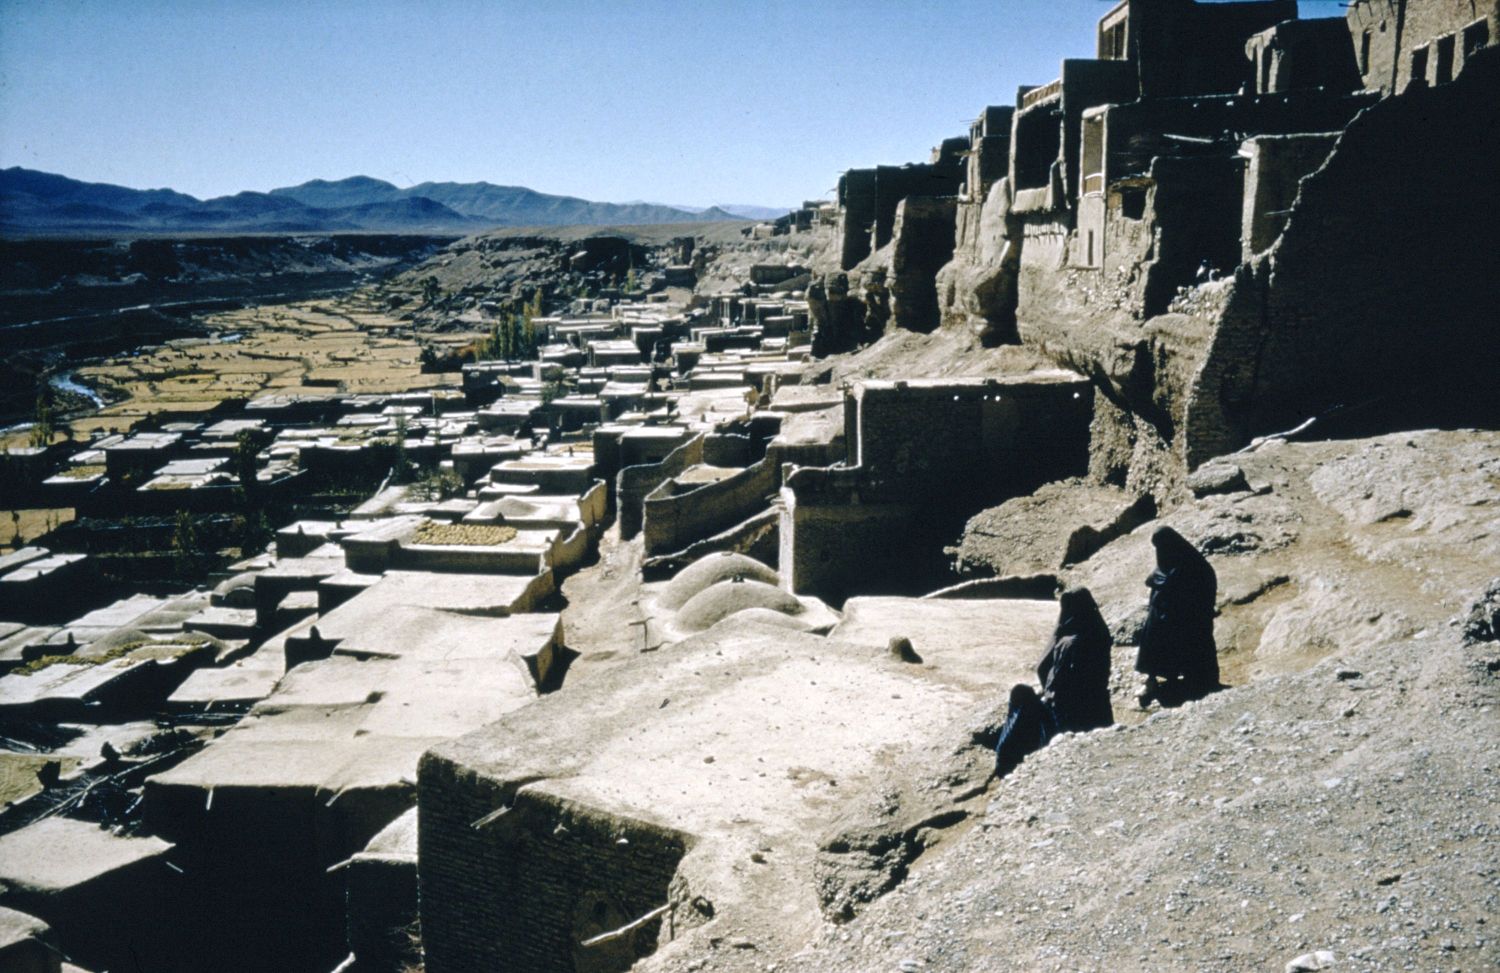 View of dwellings built into the side of rock formation.